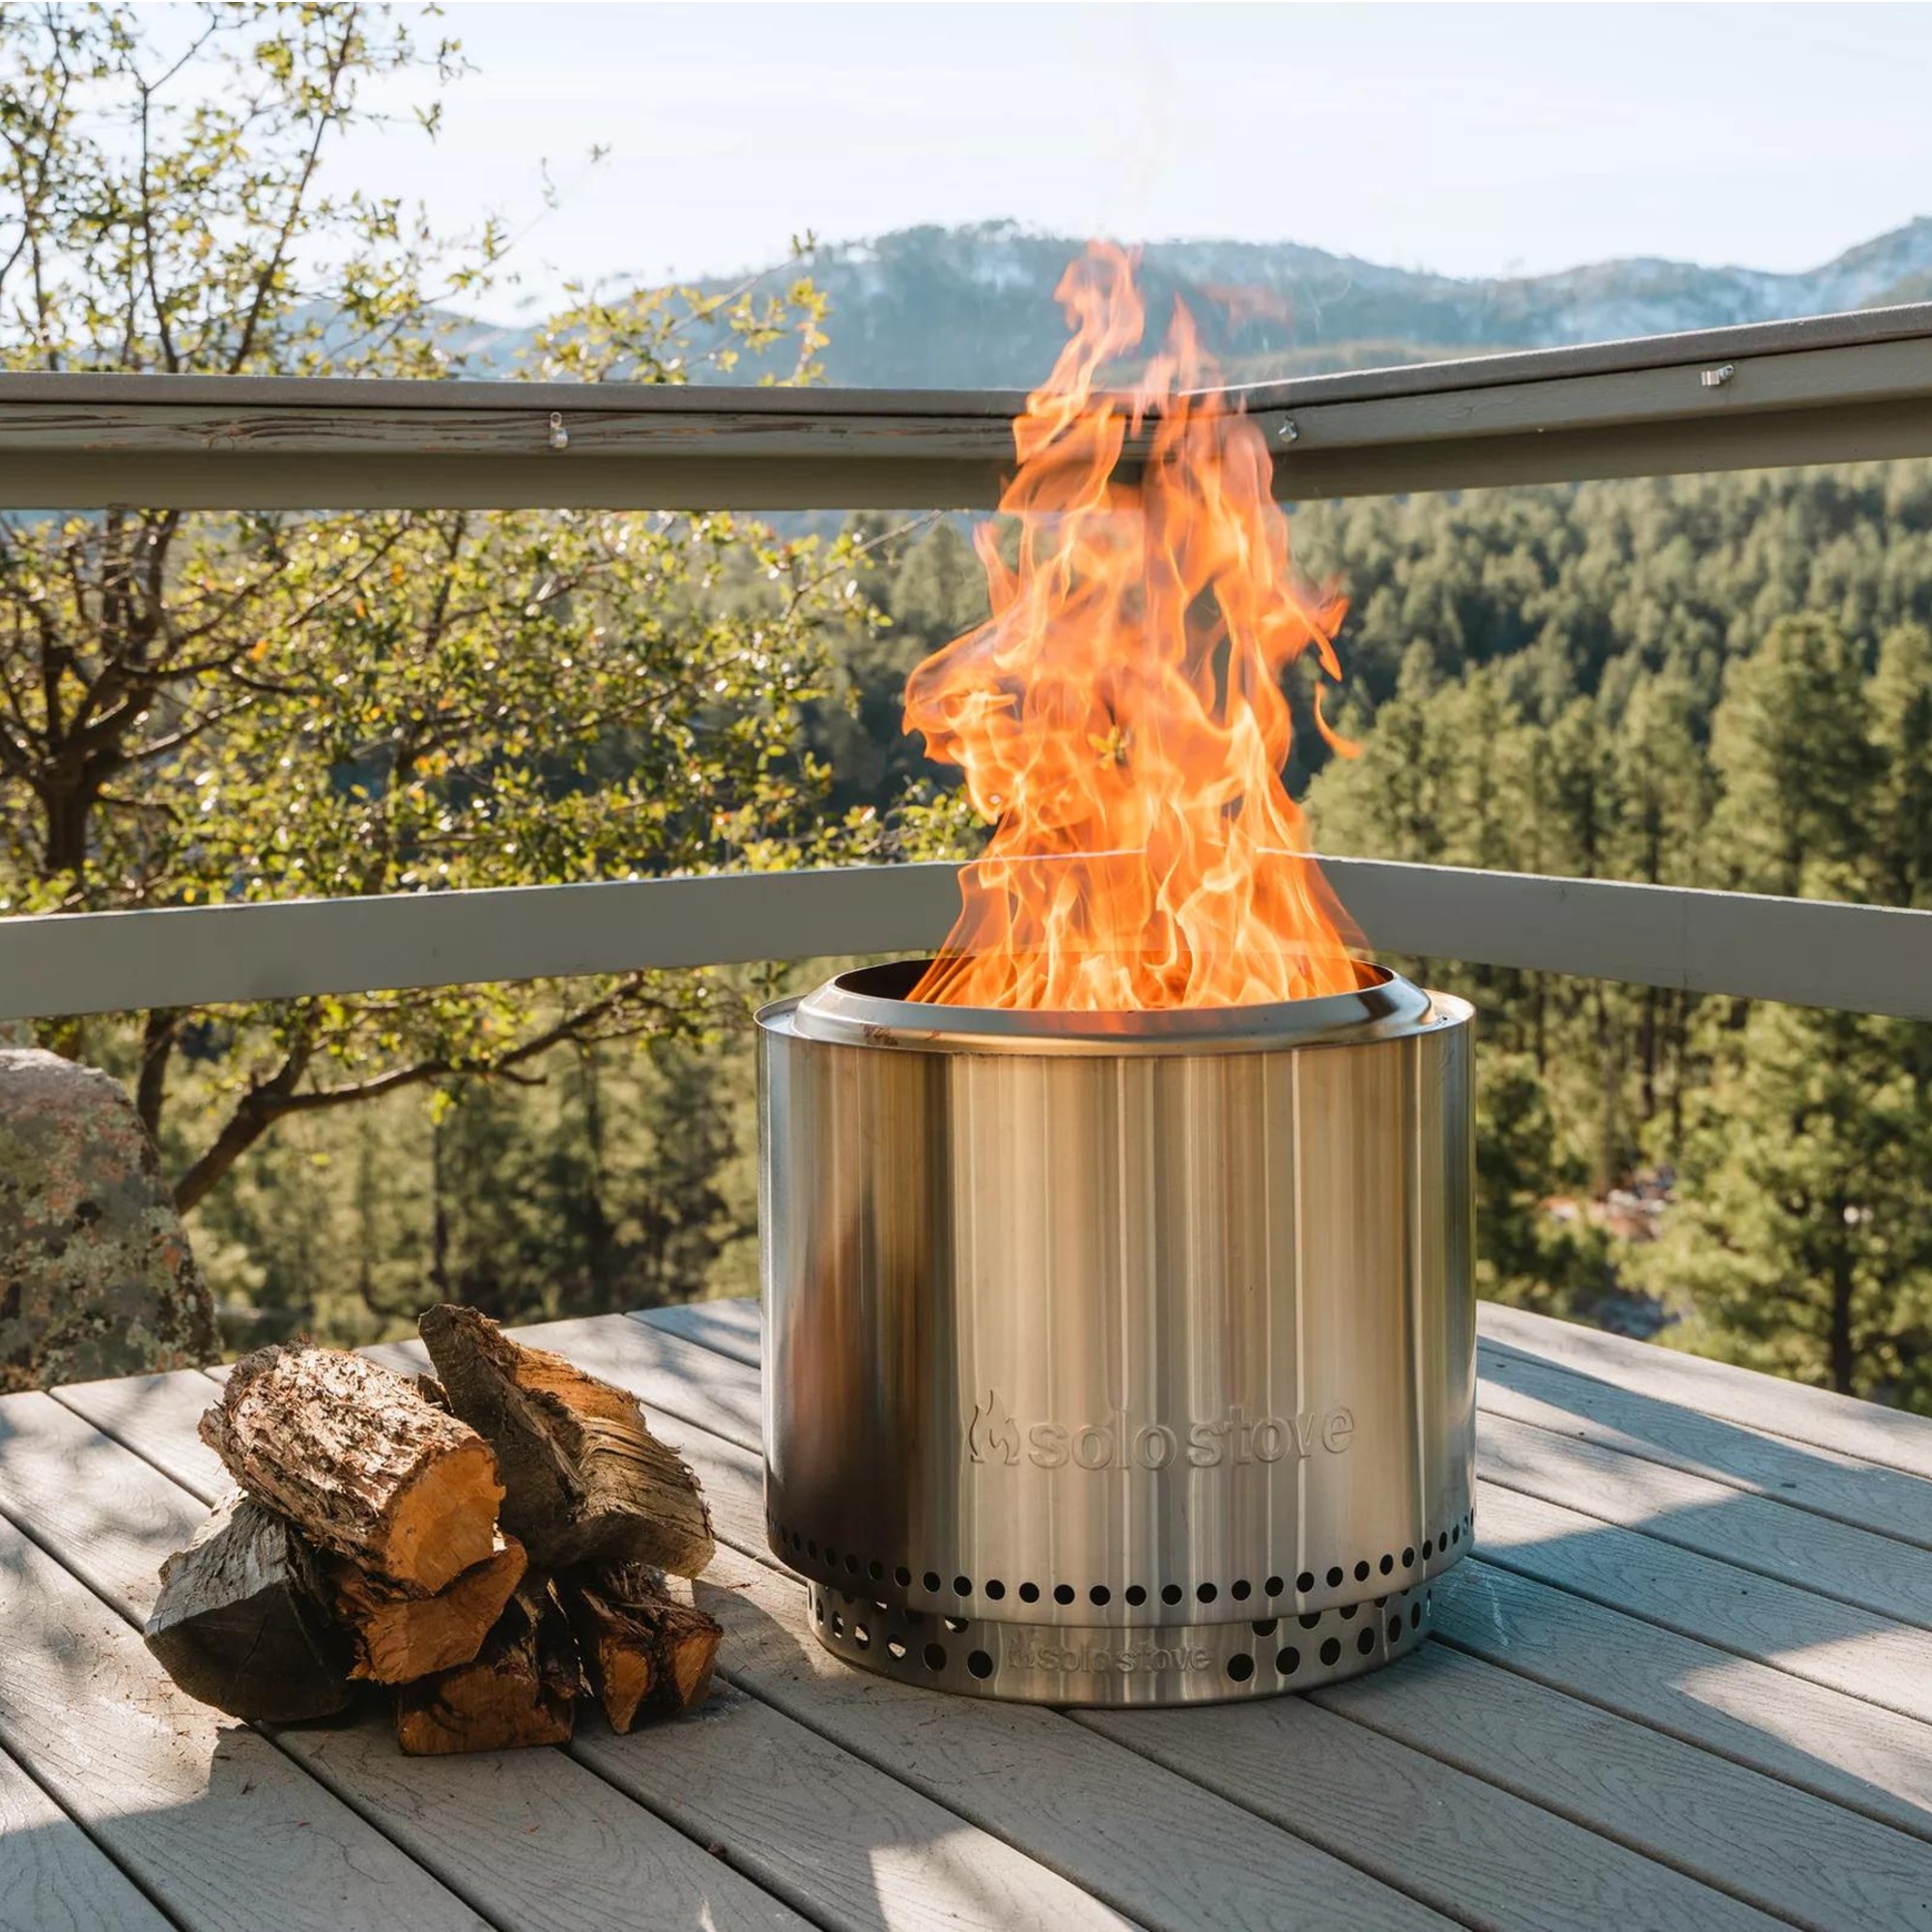 Solo Stove Bonfire 2.0 review – the smokeless firepit tested